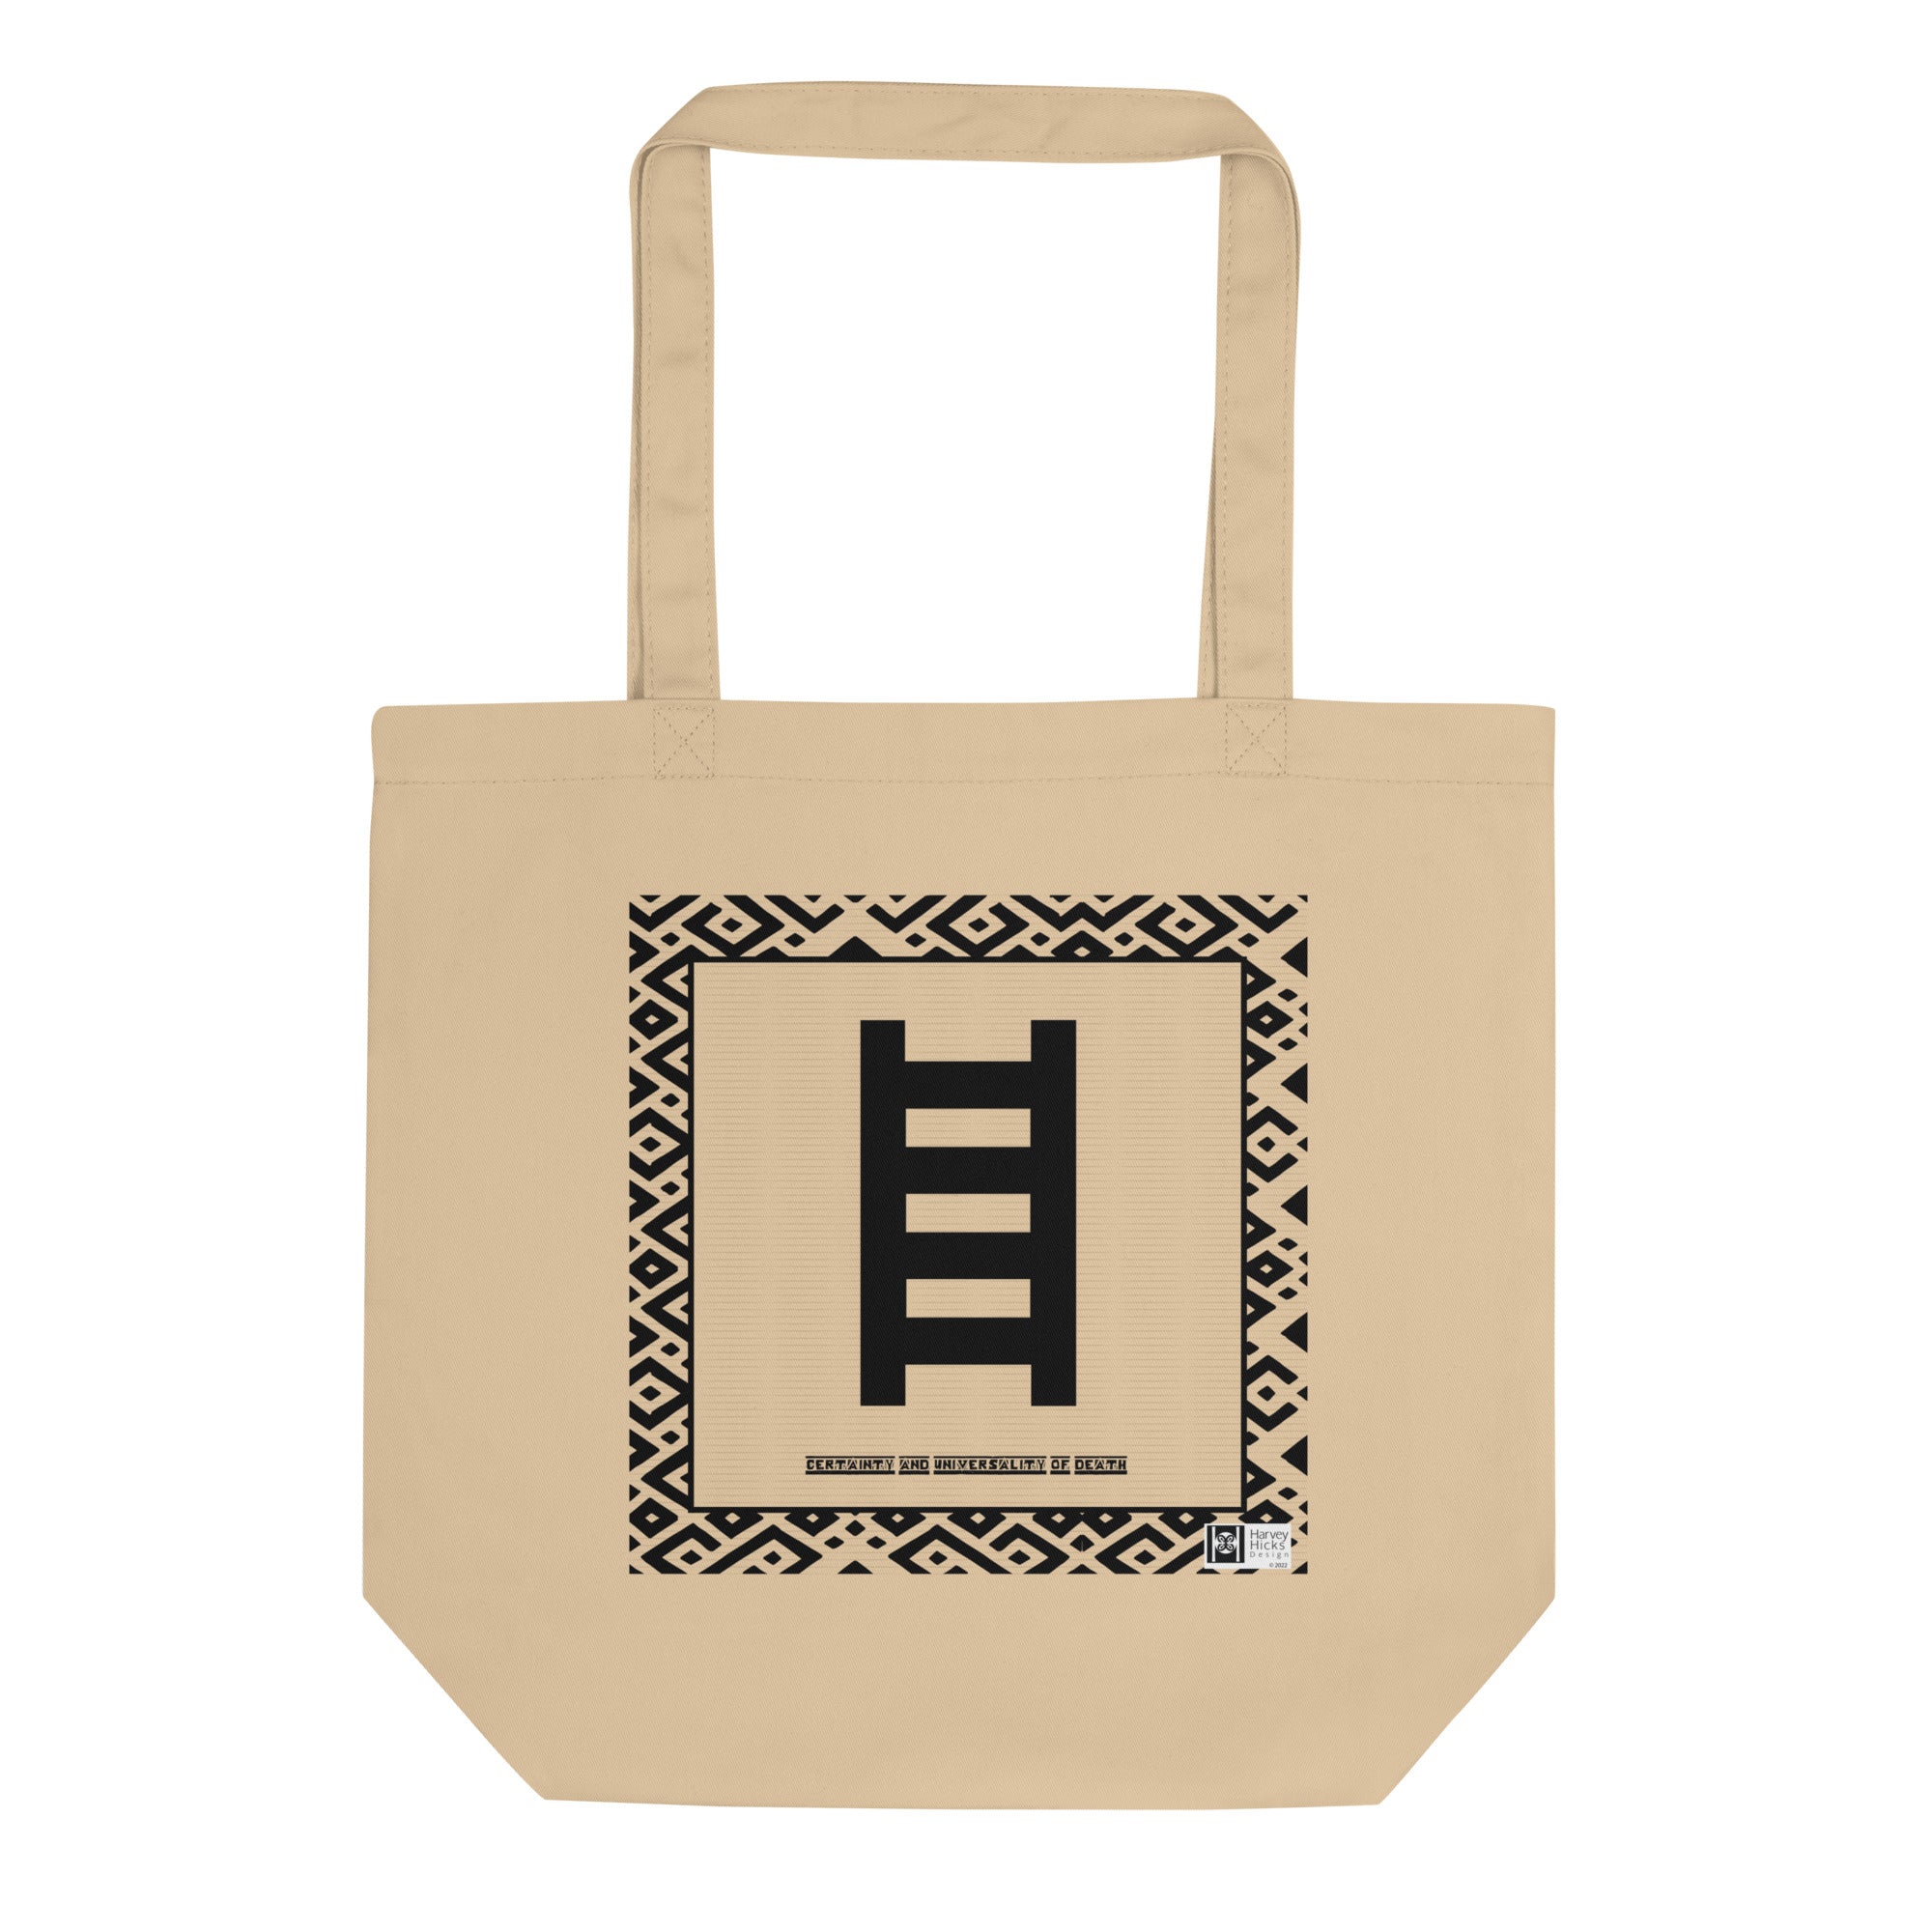 100% cotton Eco Tote Bag, featuring the Adinkra symbol for the inevitable